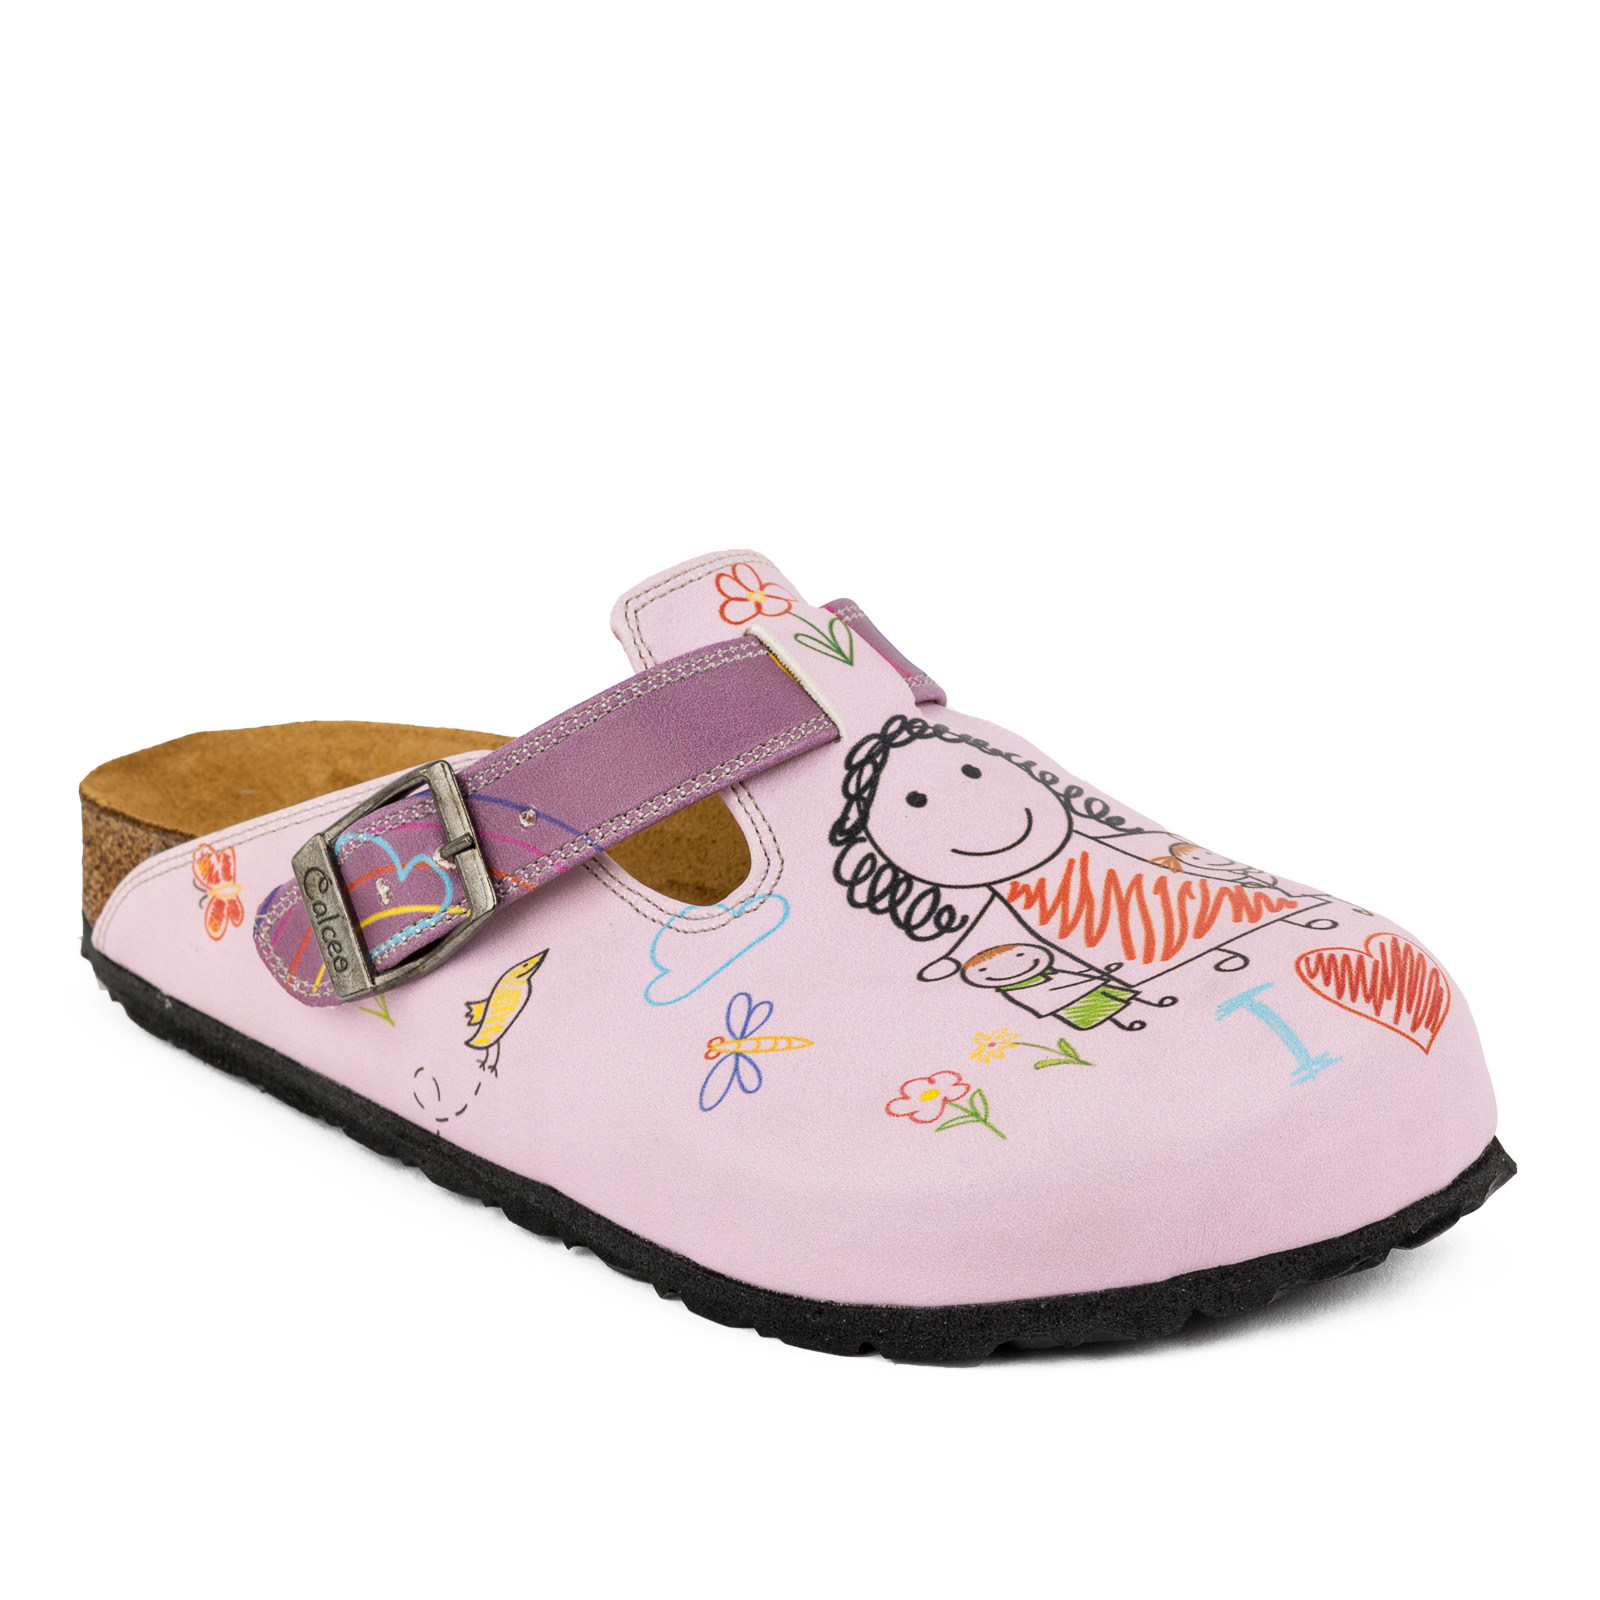 Patterned women clogs A085 - MOM - ROSE